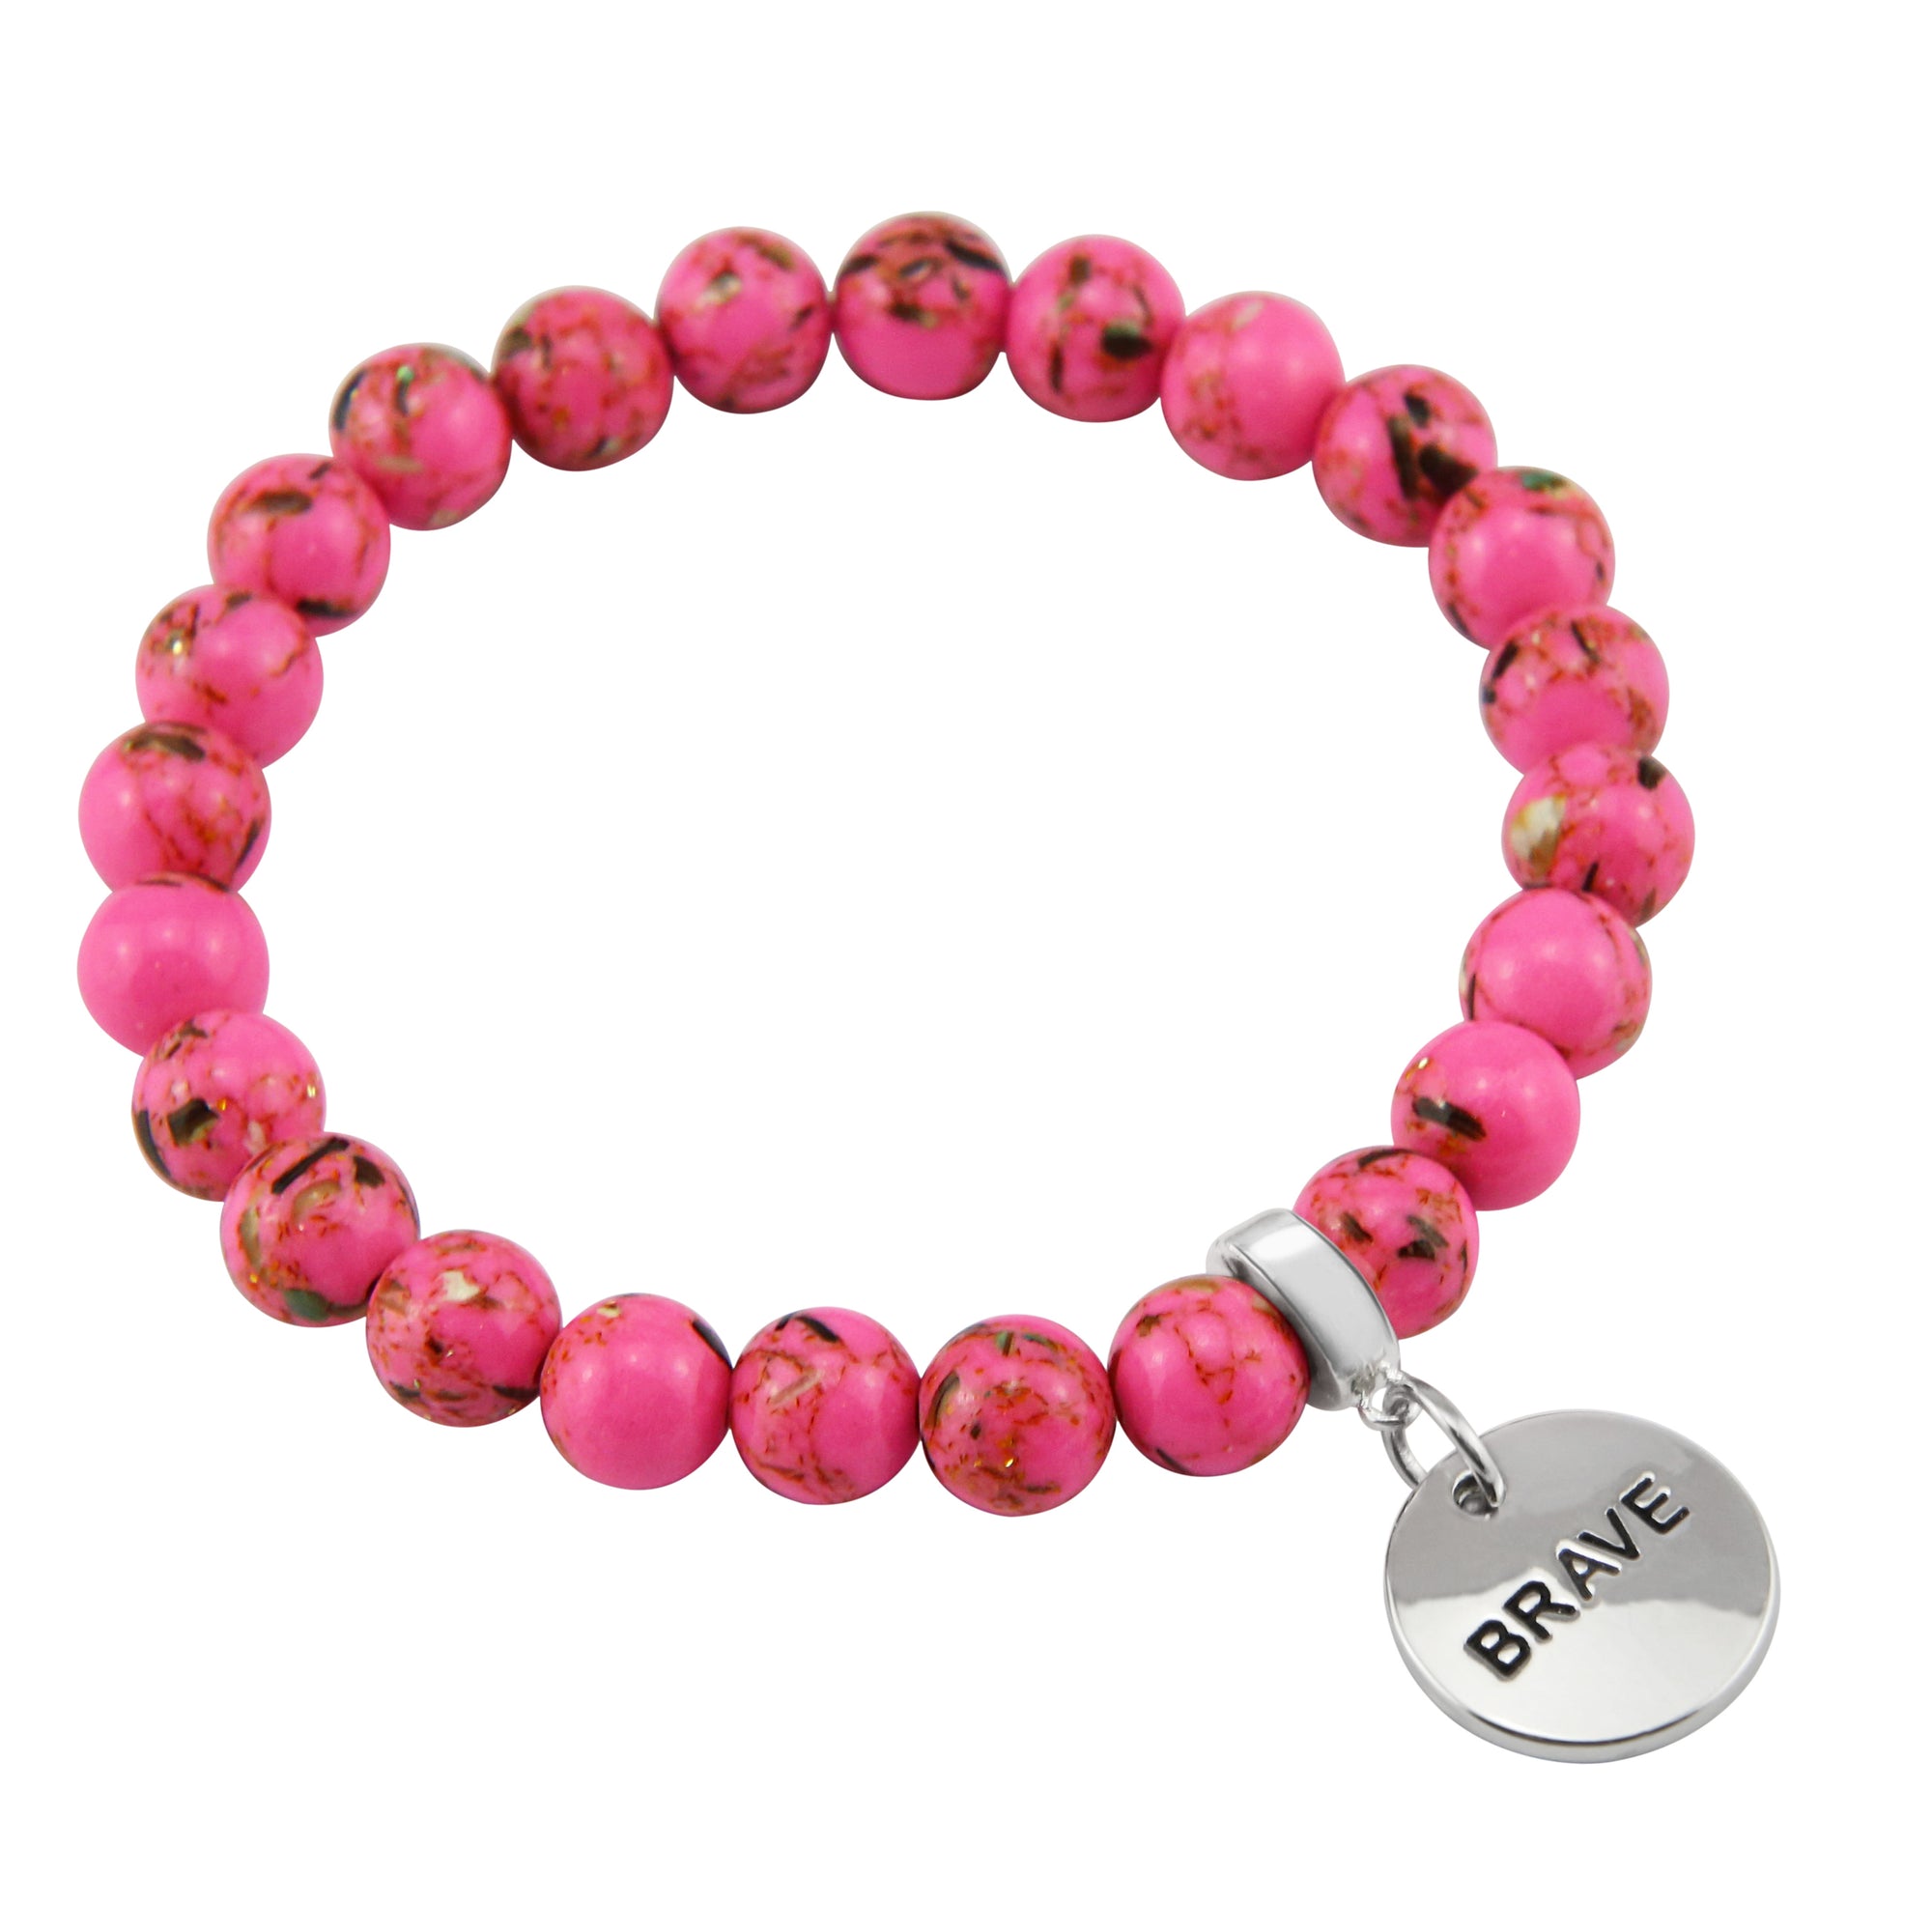 Hot Pink Synthesis Stone 8mm Bead Bracelet with Brave Silver Word Charm. Fundraiser for the National Breast Cancer Foundation